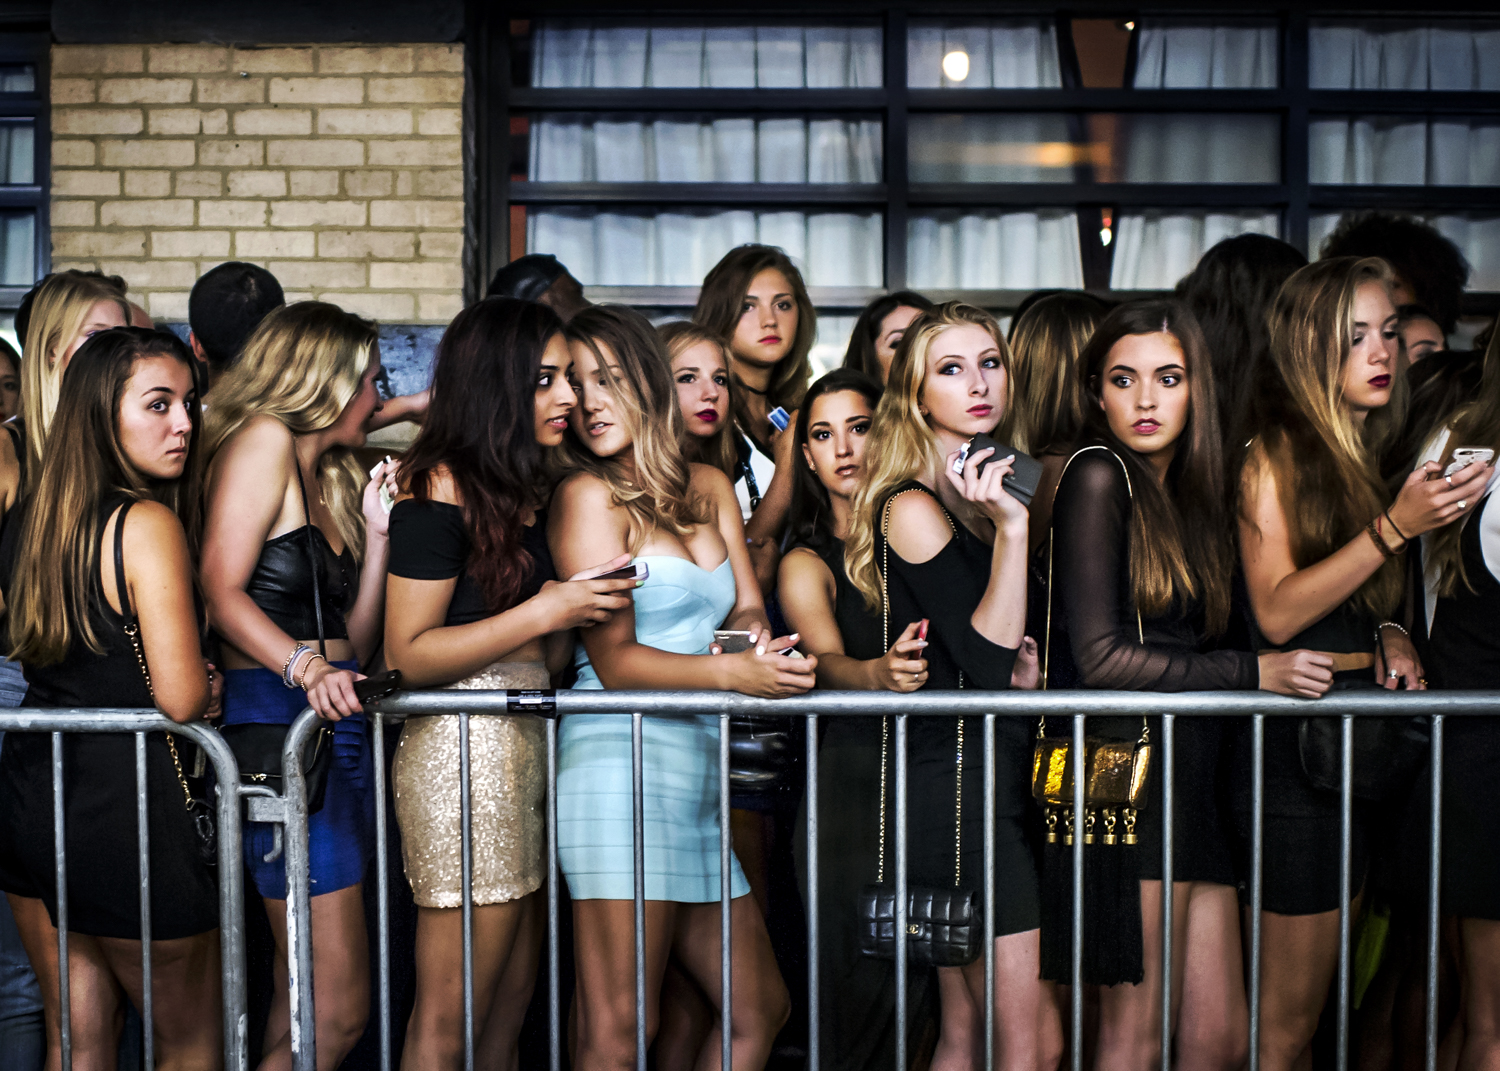 Young women stand in line waiting for access to a popular club in August 2015.